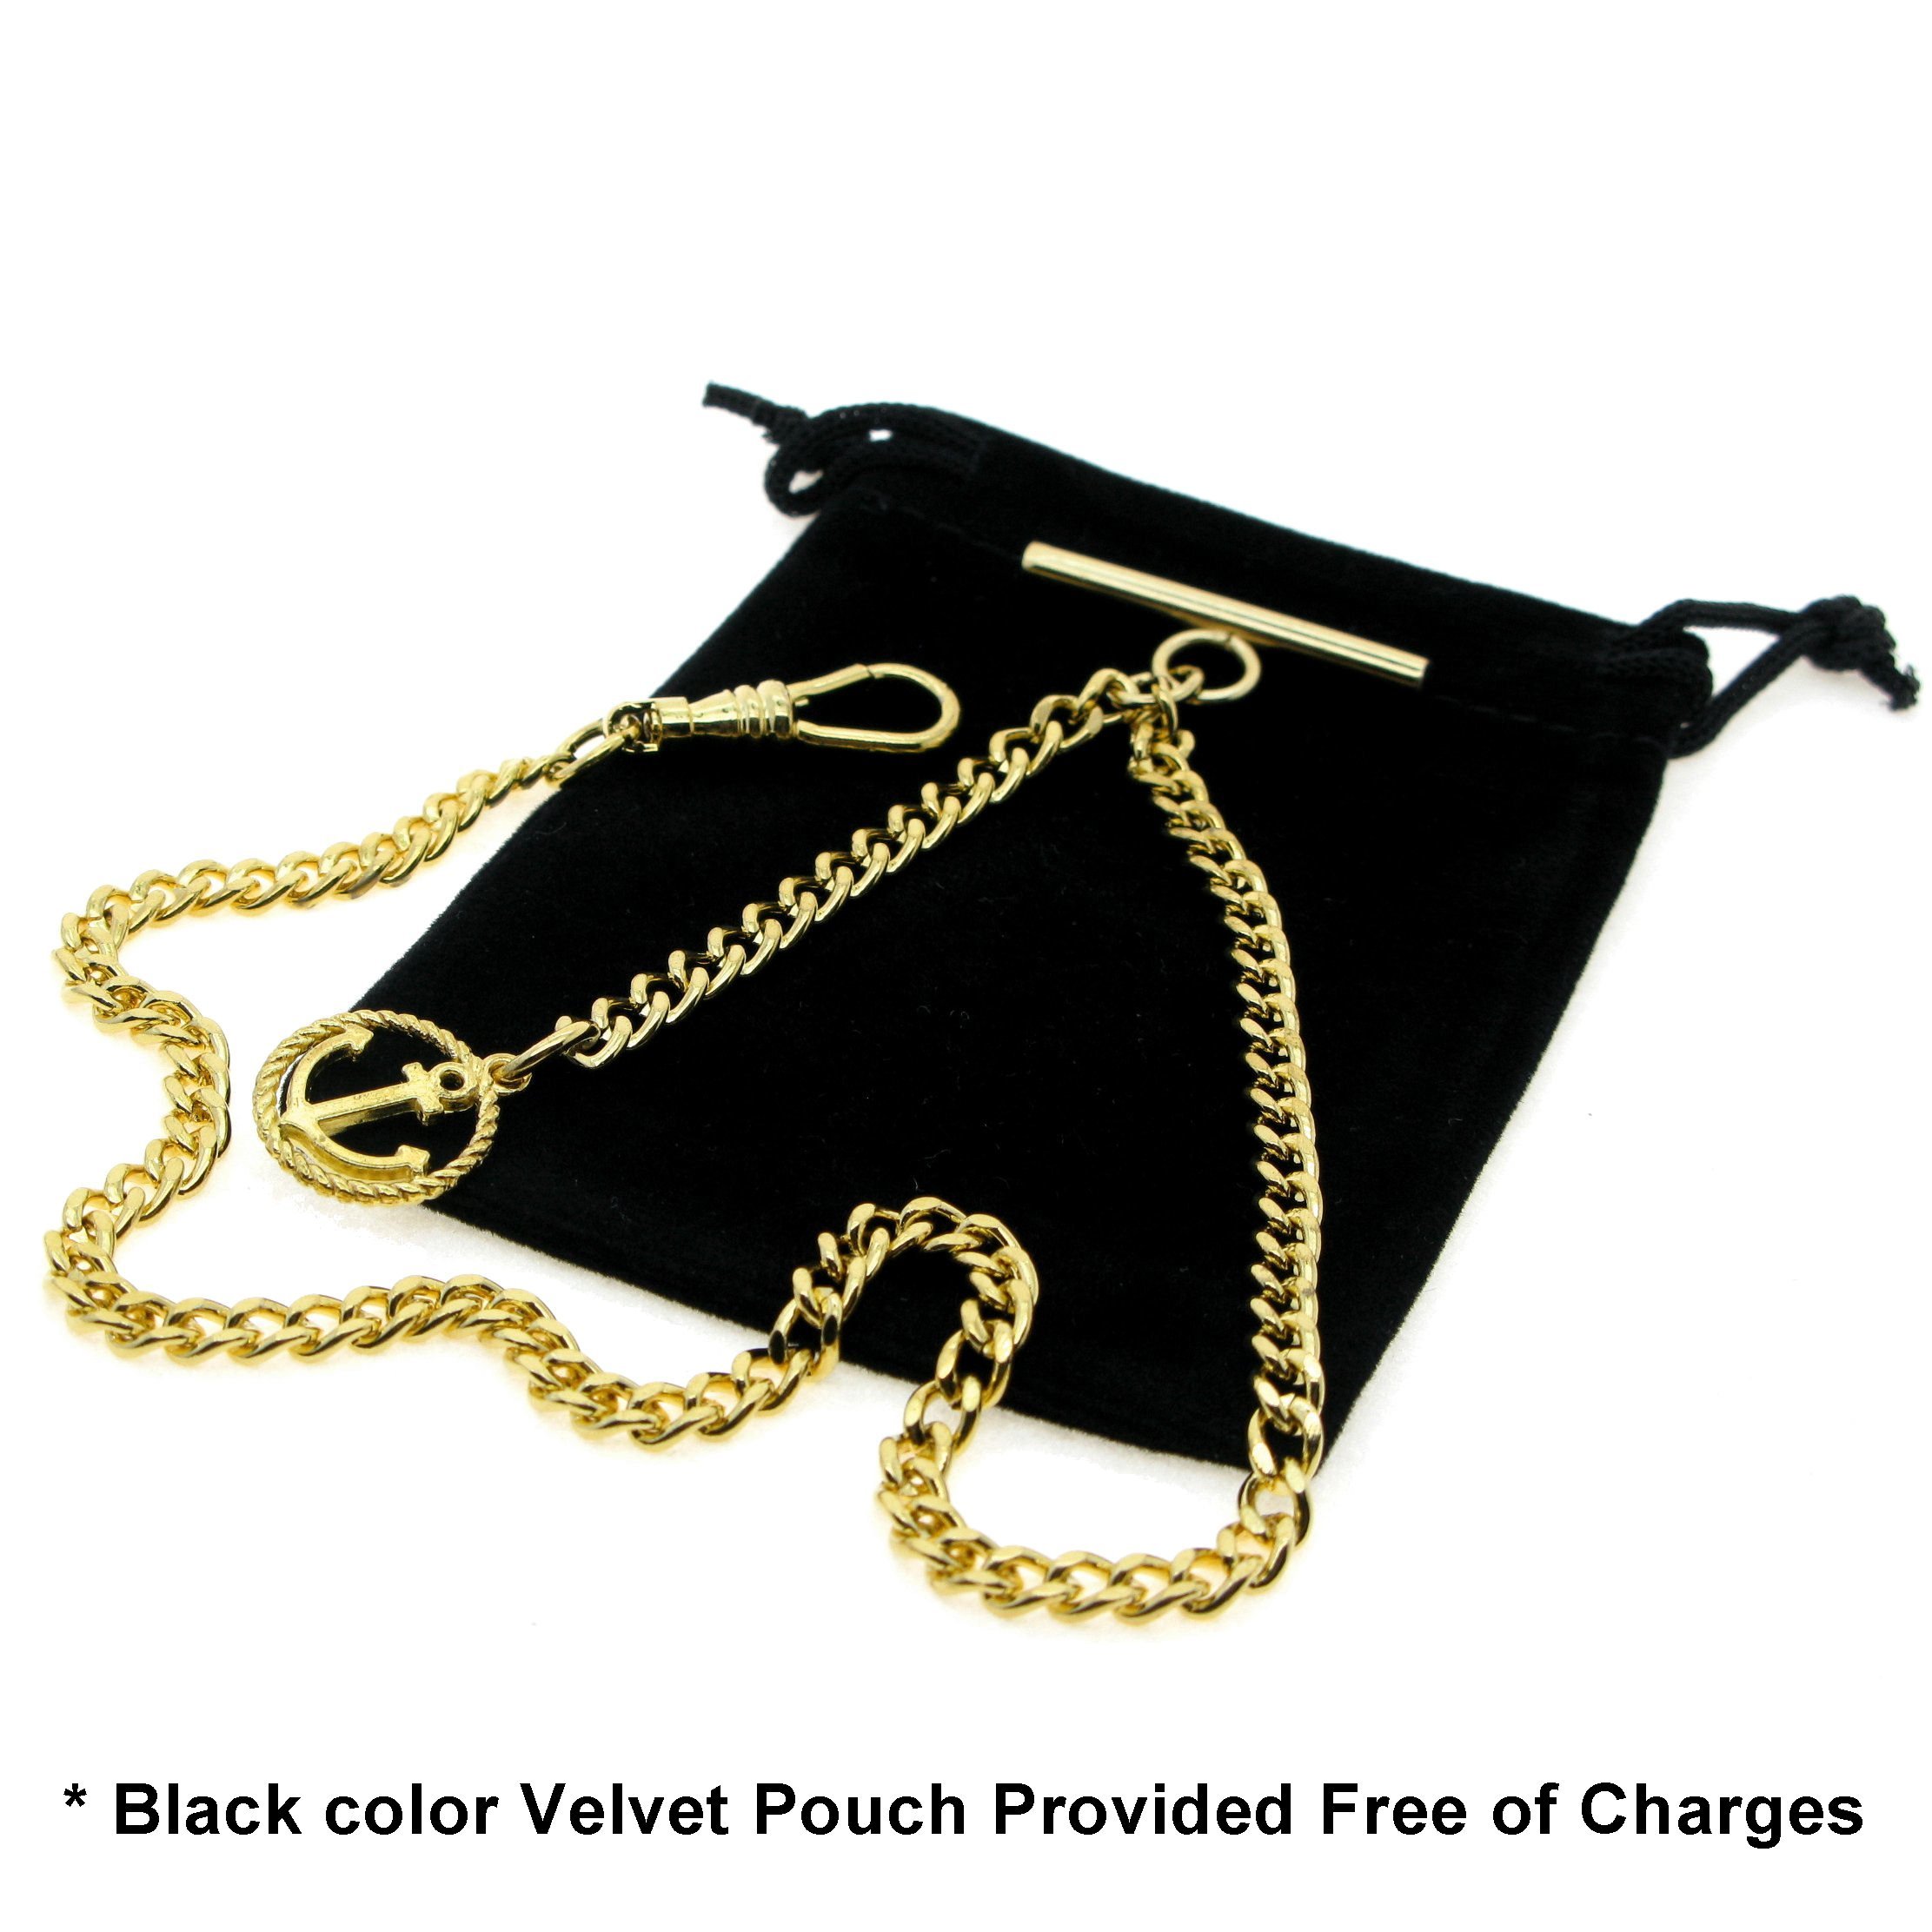 Albert Chain Gold Color Pocket Watch Chains Vest Chain for Men with T Bar Swivel Clasp and Anchor Medal Fob AC66